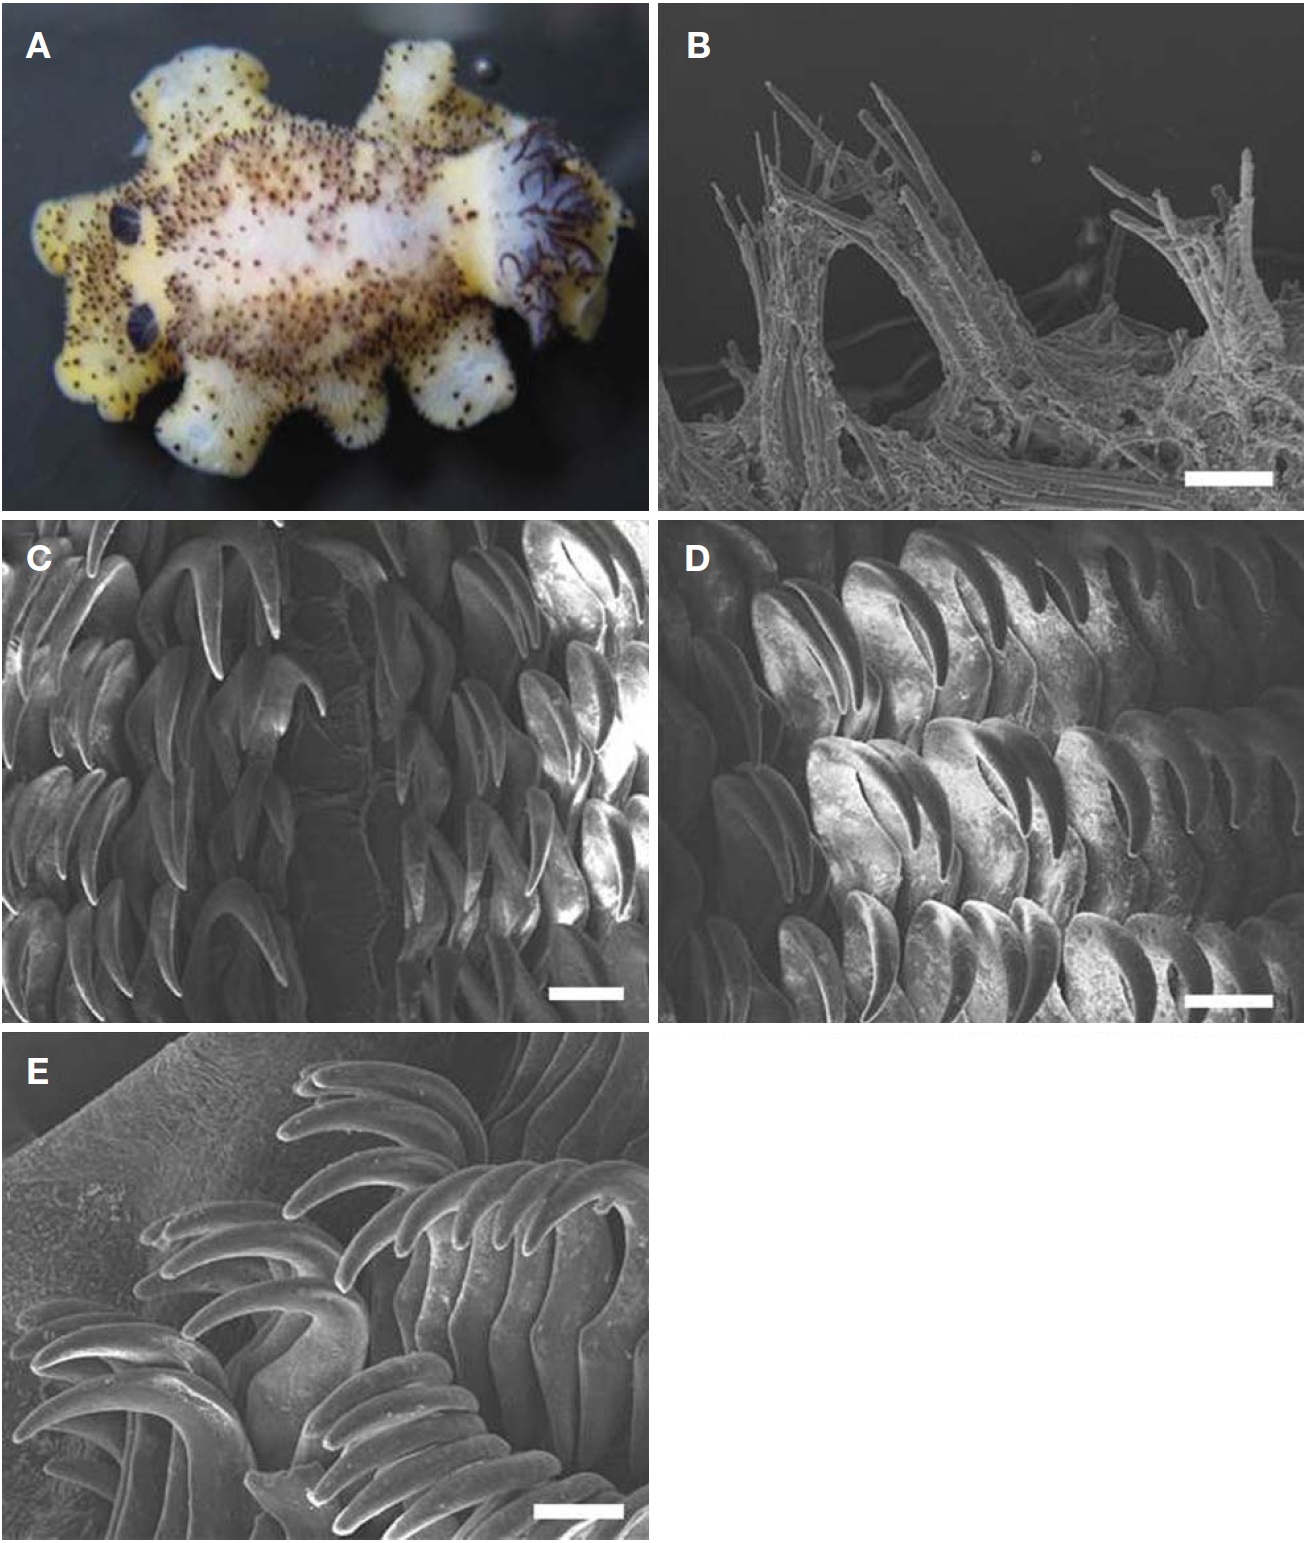 Jorunna parva (Baba, 1938). A, Dorsal view, preserved specimen (body length, 27 mm). Scanning electron microscope photographs of radula: B, Caryophillidia on dorsum; C, Central region and inner lateral teeth; D, Mid-lateral teeth; E, Outer lateral teeth. Scale bars: B-E=50 μm.